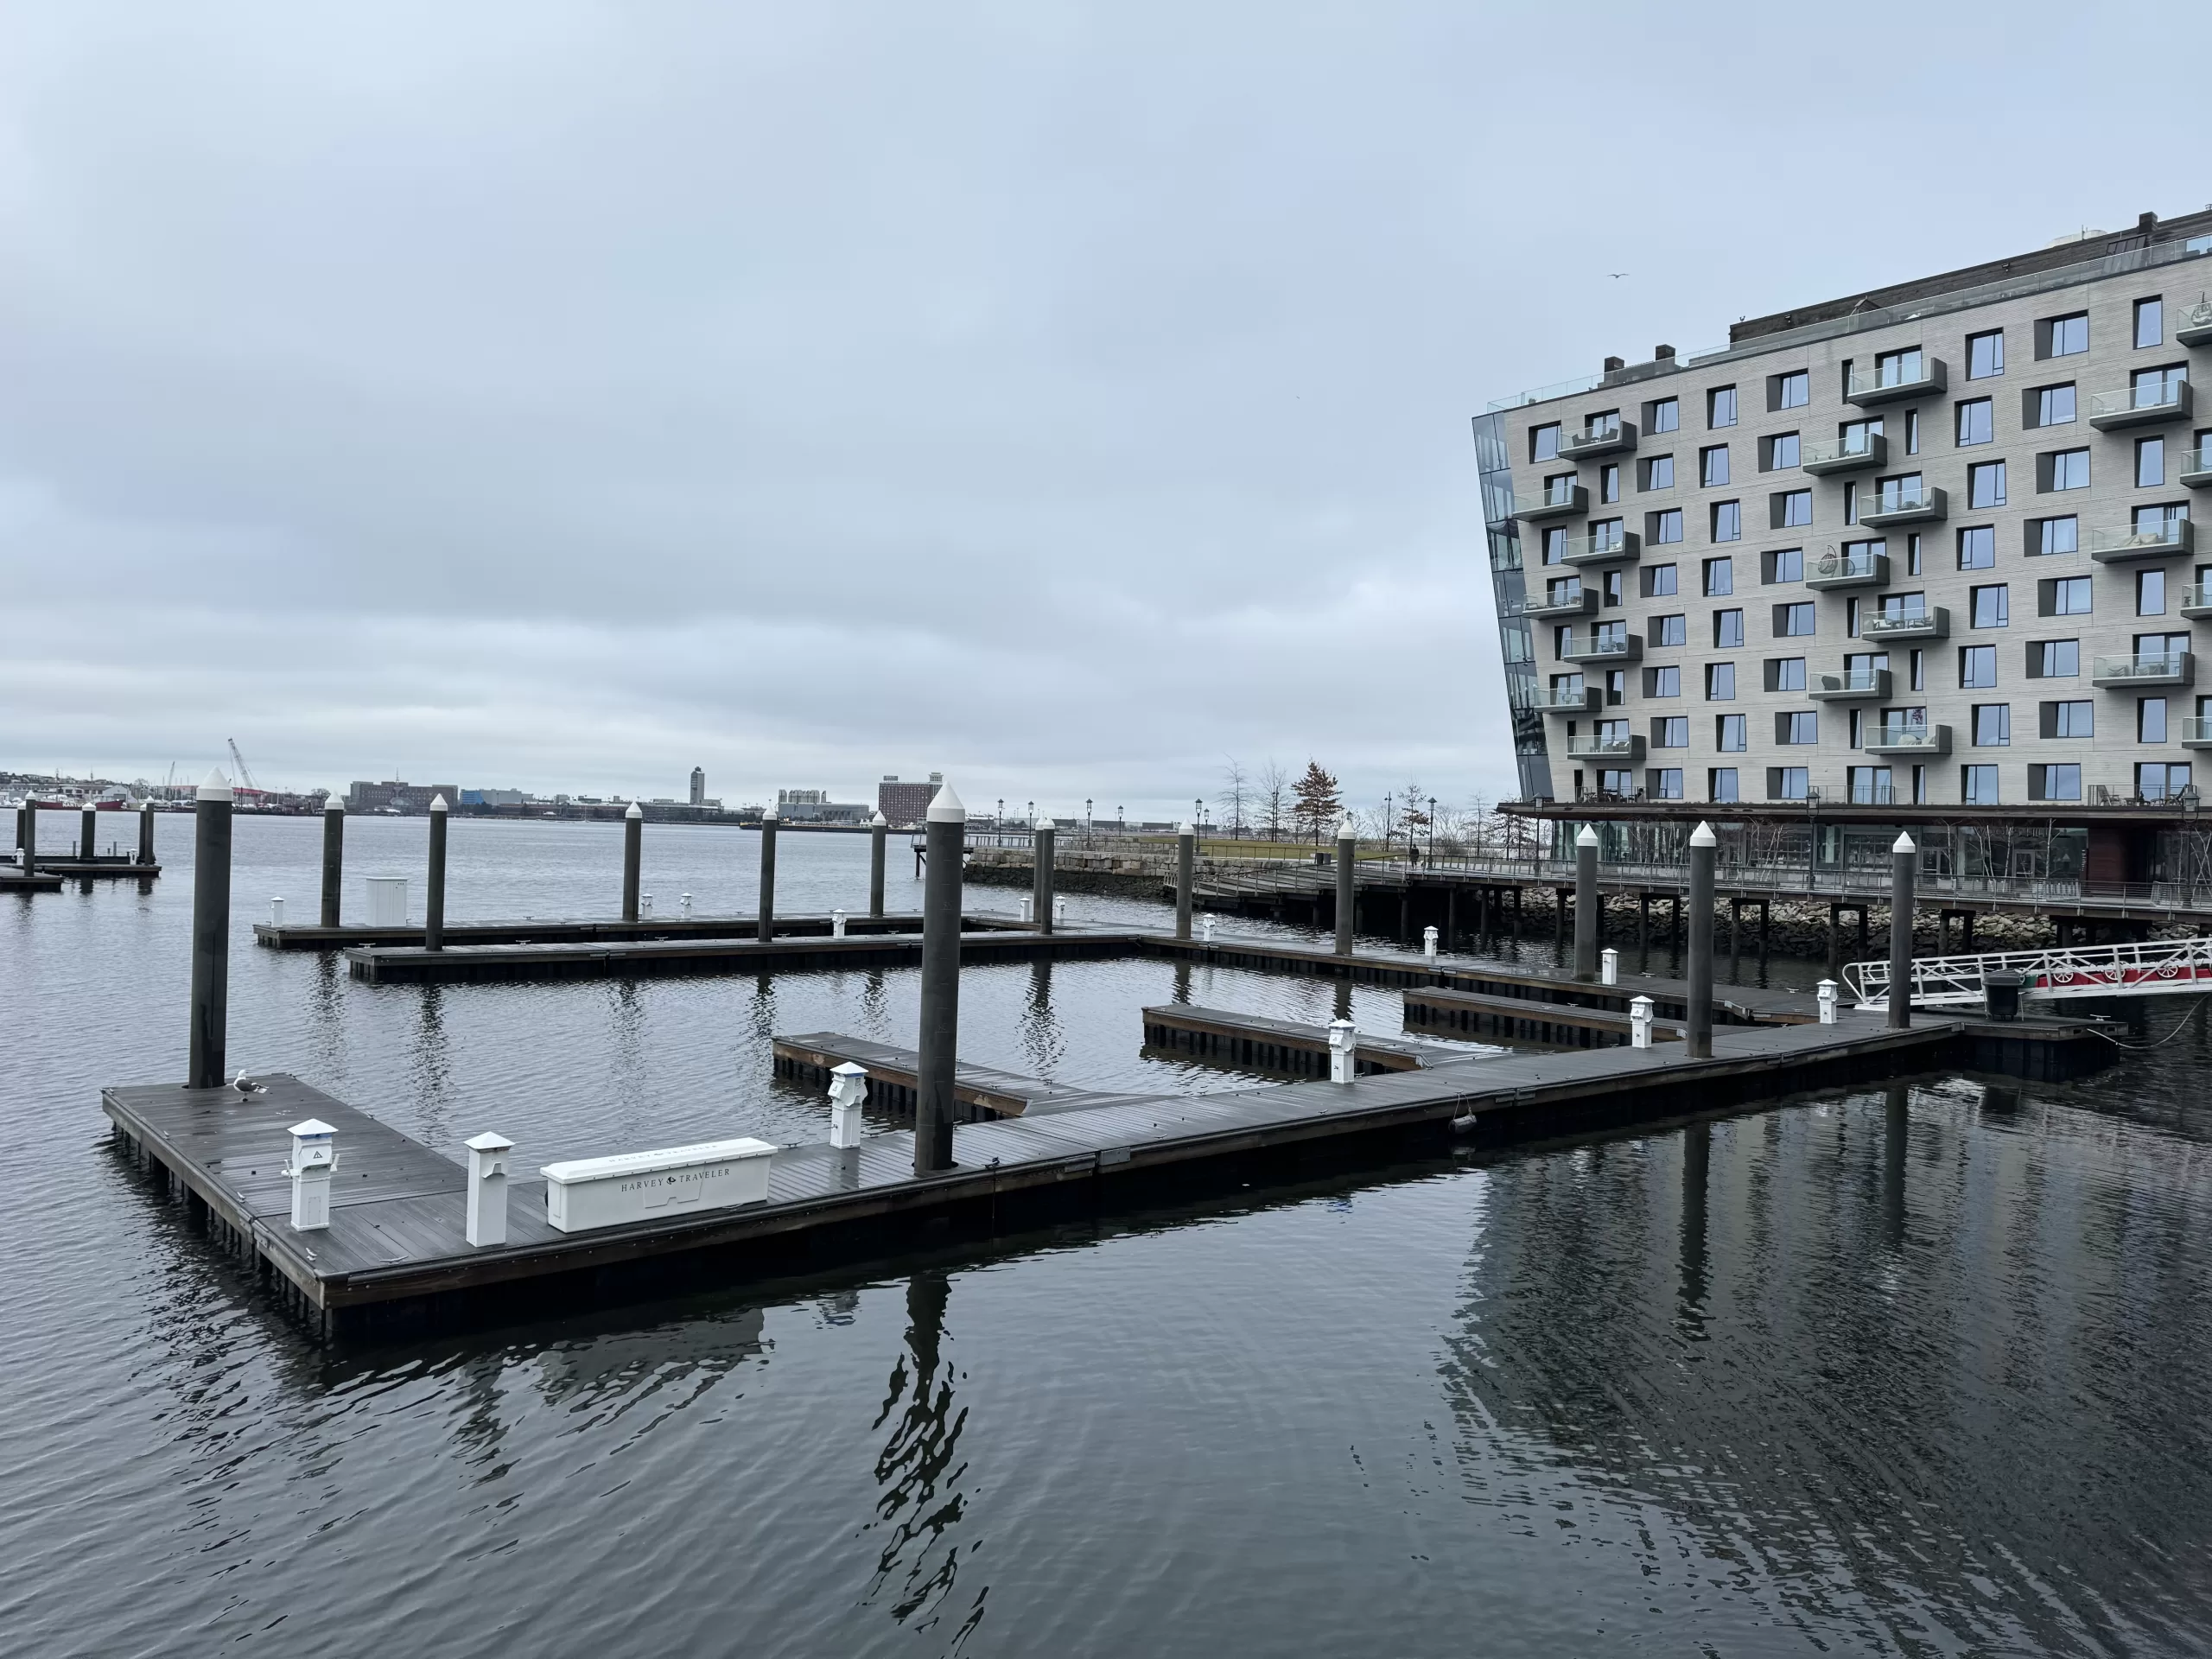 An empty dock on a cloudy day in Boston’s Seaport District overlooking the Boston Main Channel.